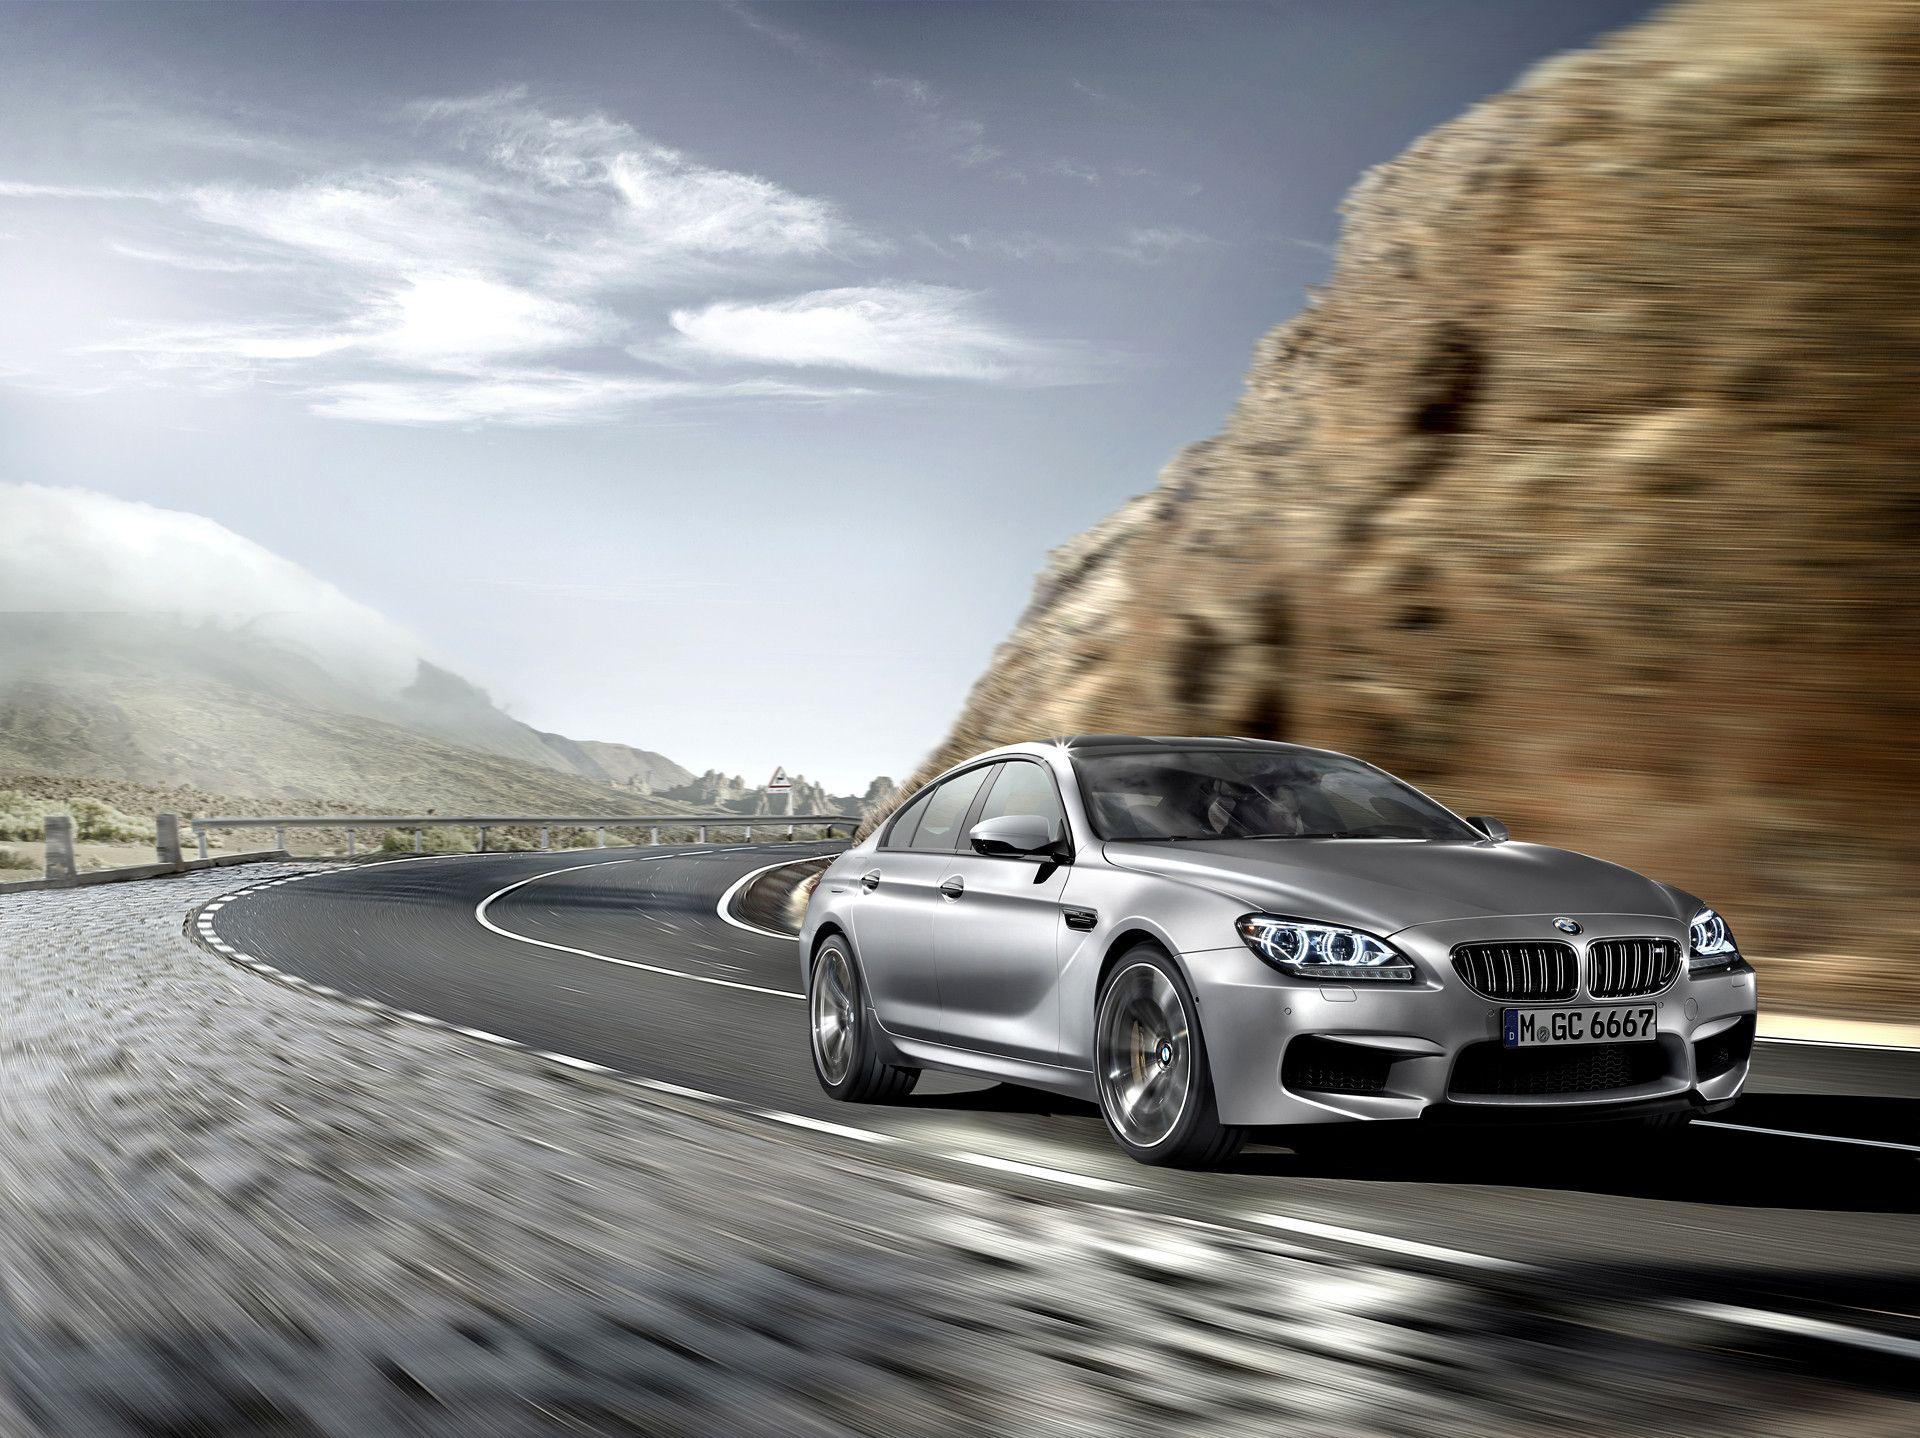 Another Set Of BMW M6 Gran Coupe Wallpaper. My Car Portal